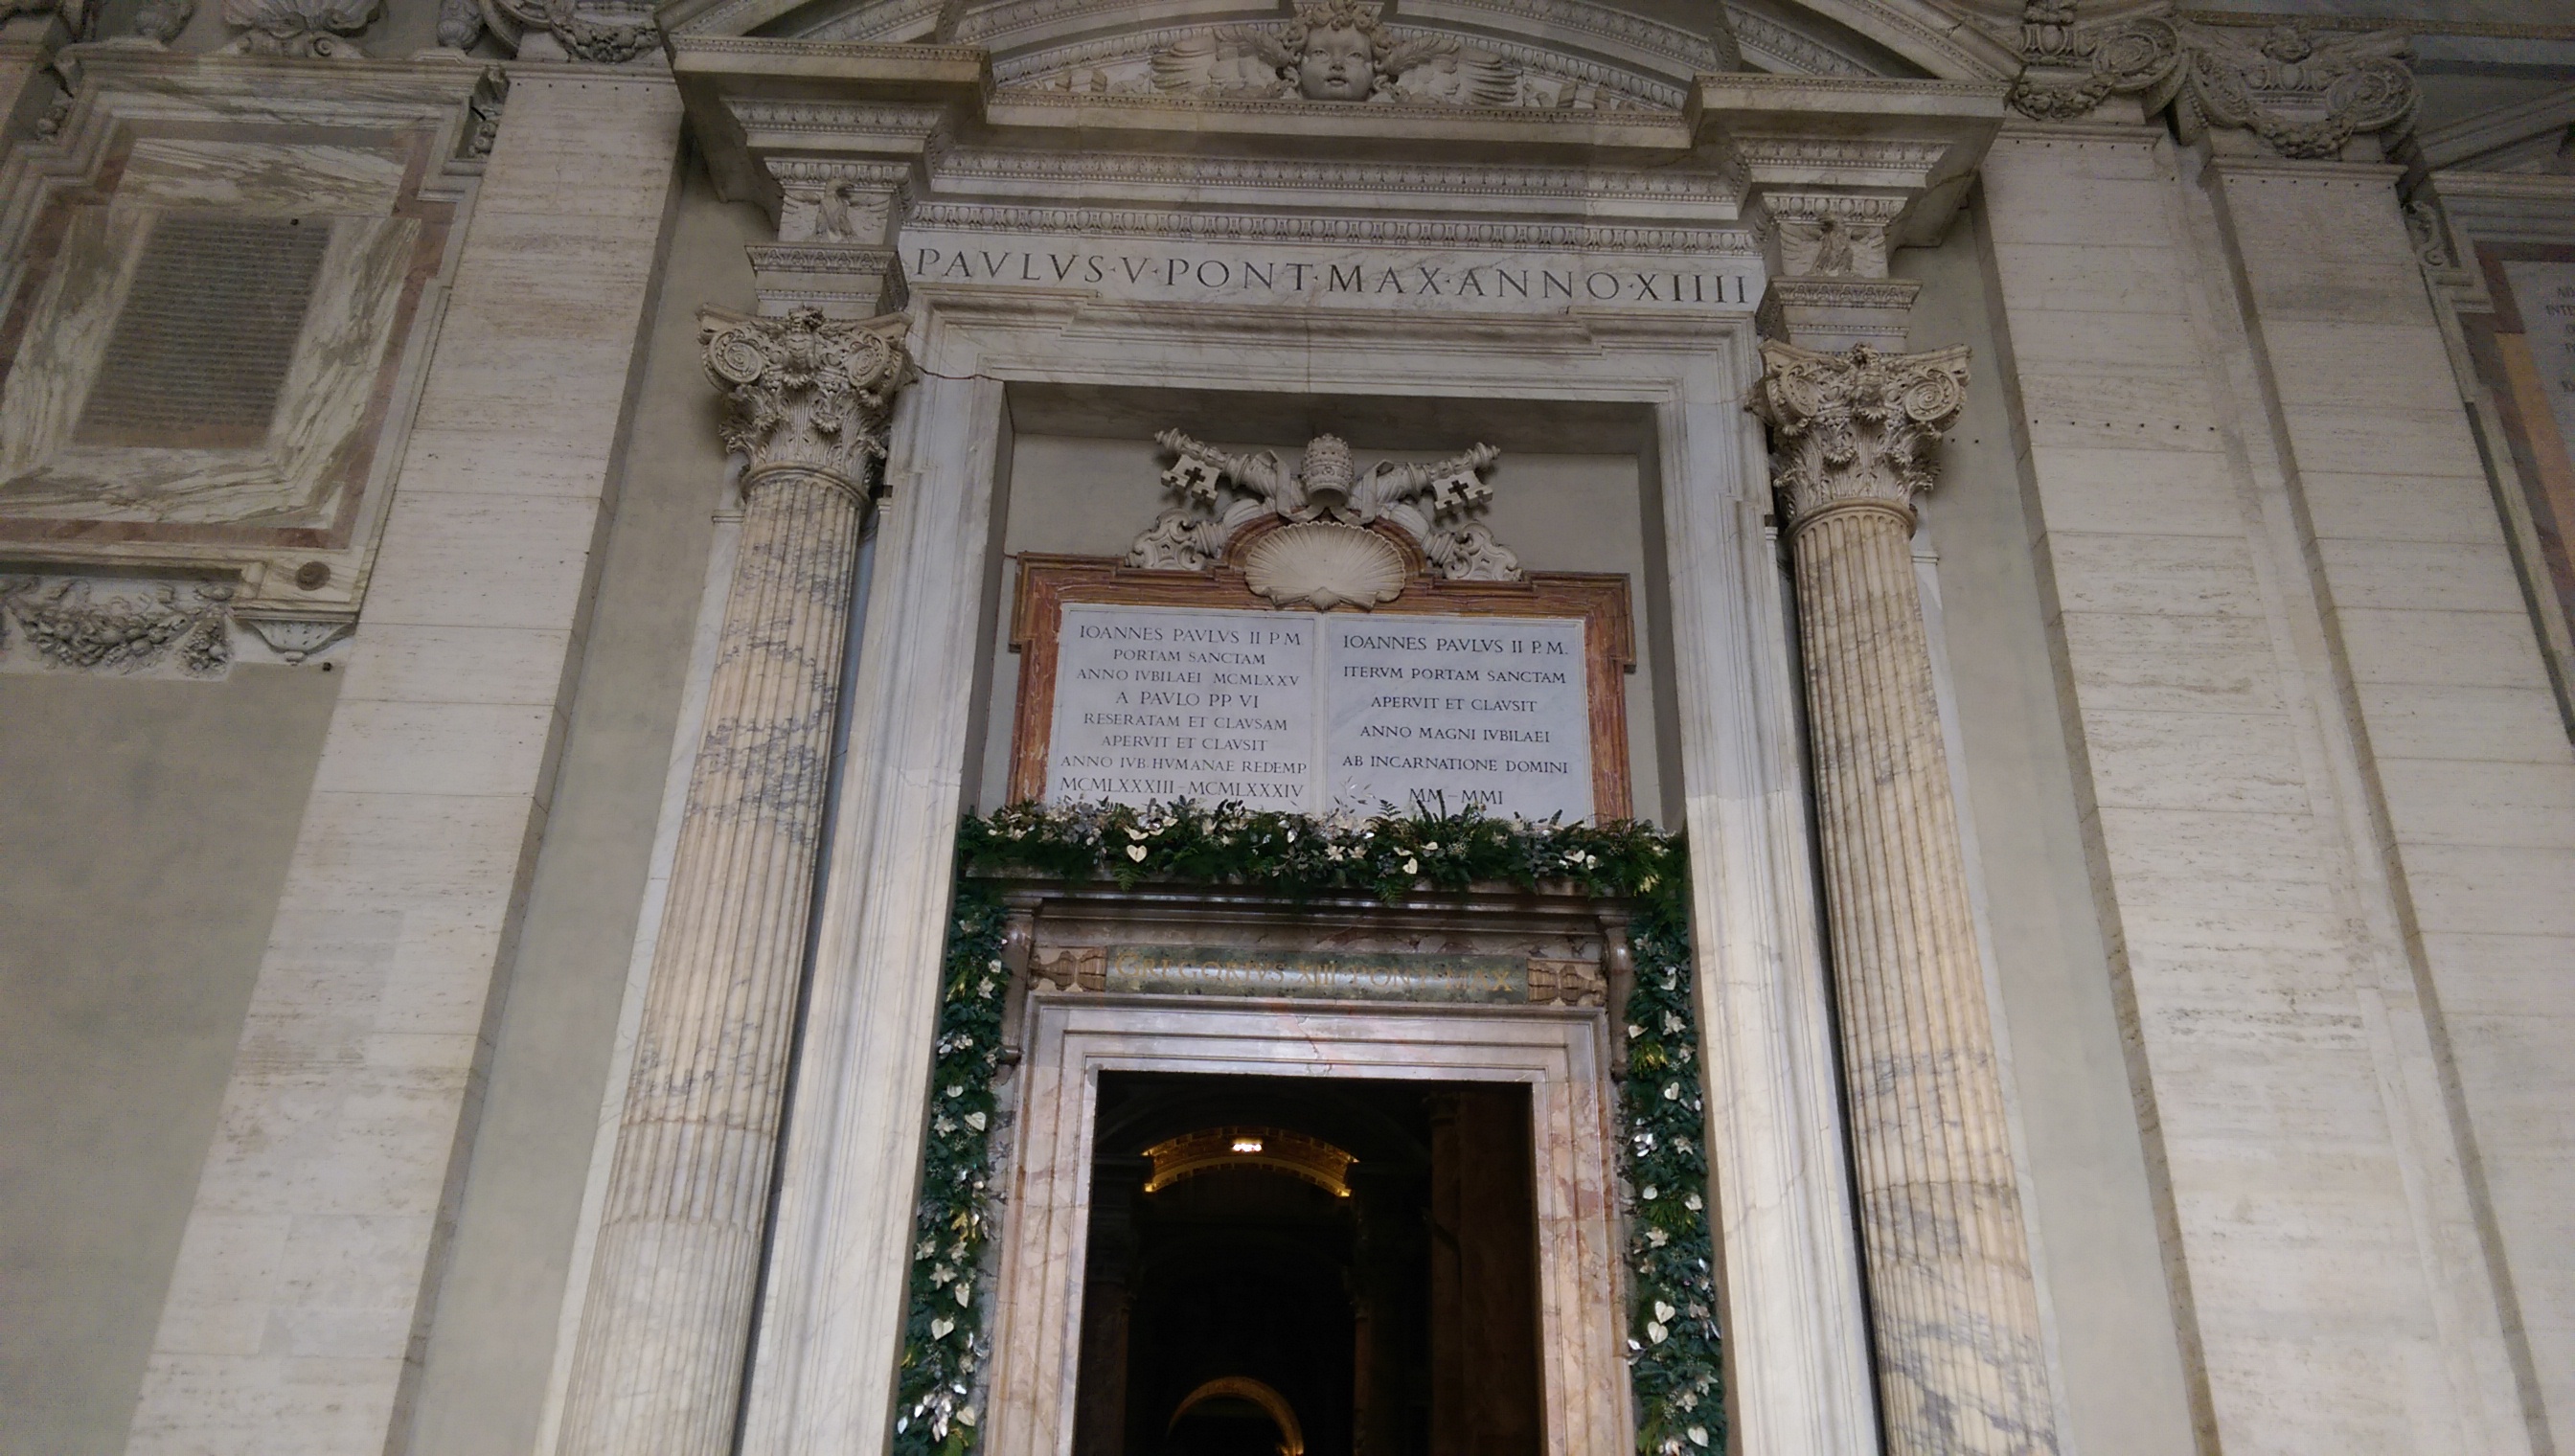 Opening Holy Door at St. Peter